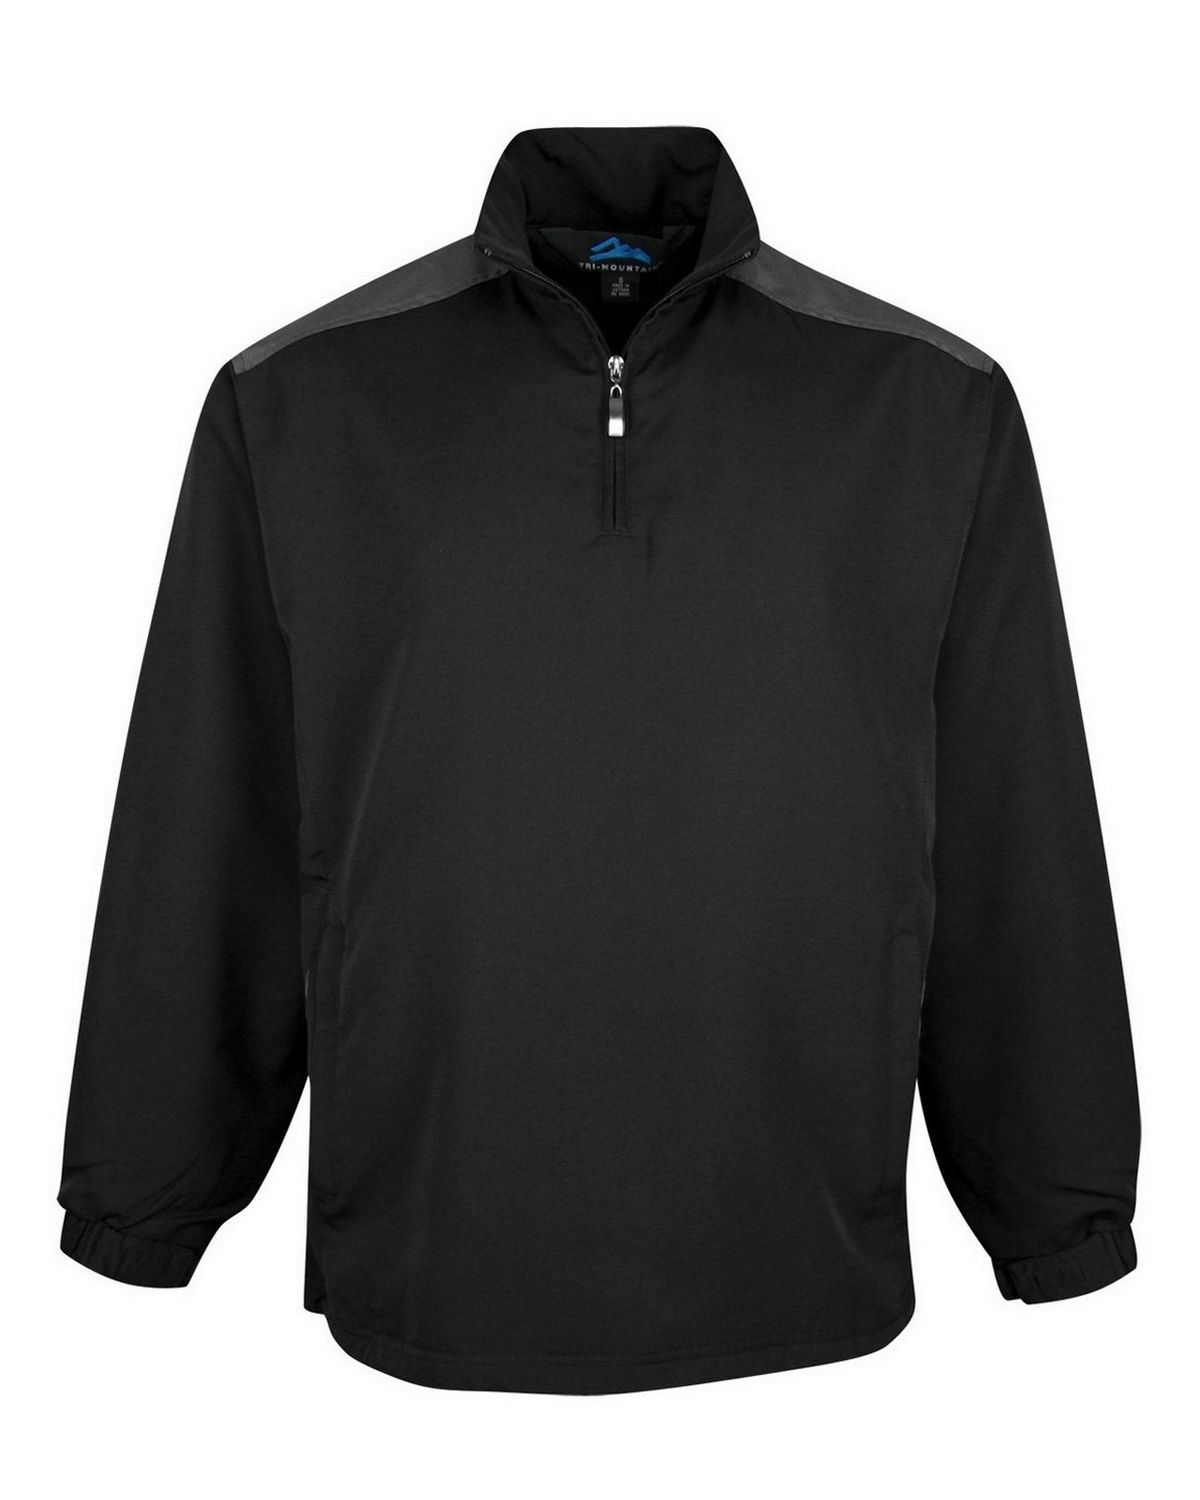 Tri-Mountain Water Resistant Windproof Windshirt 2500